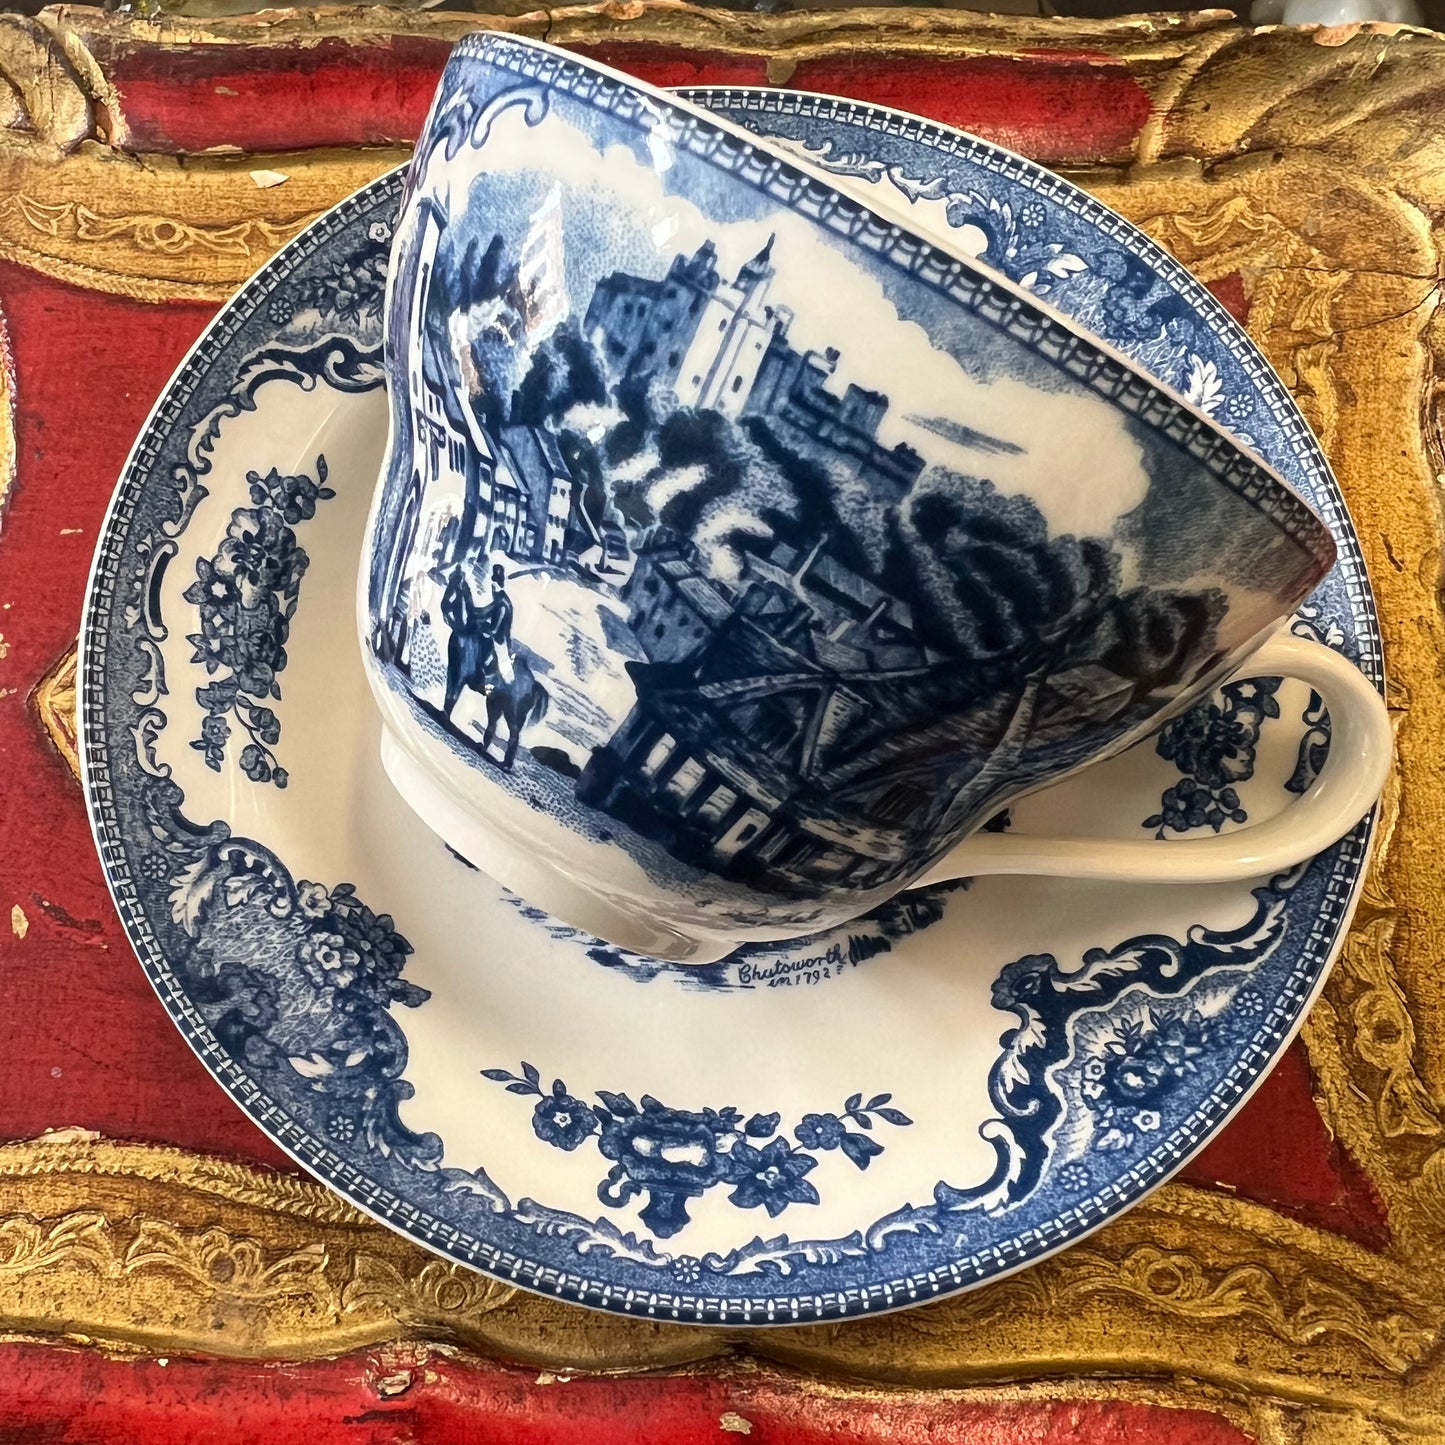 Breakfast Cup and Saucer Johnson Bros England Classic Blue and White 💙